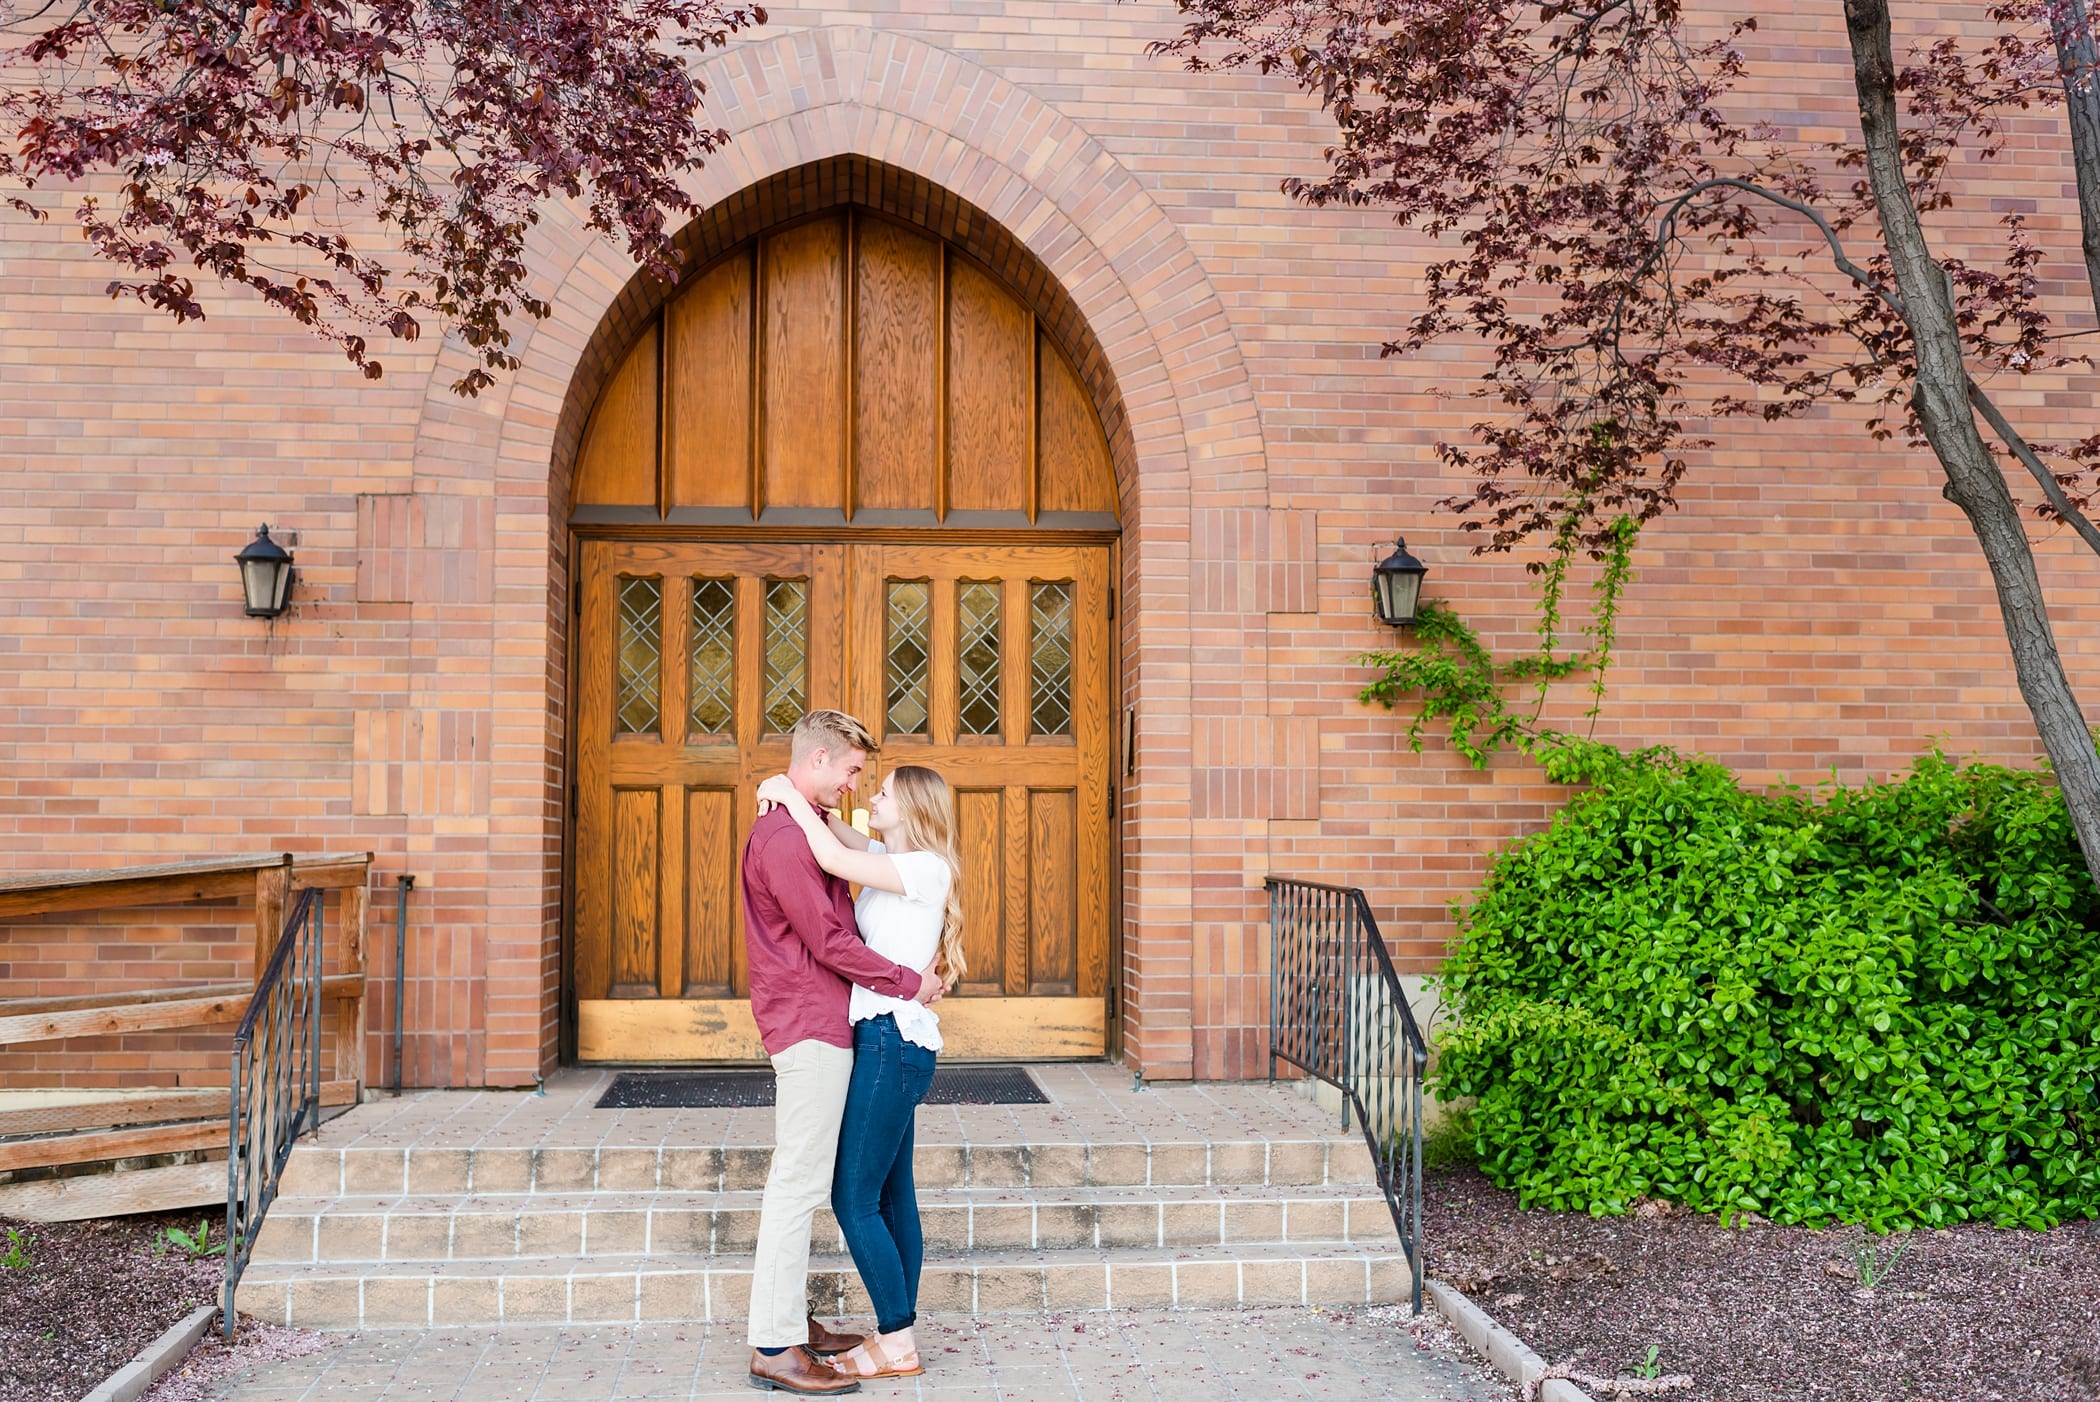 downtown engagements with brick arches and old doors